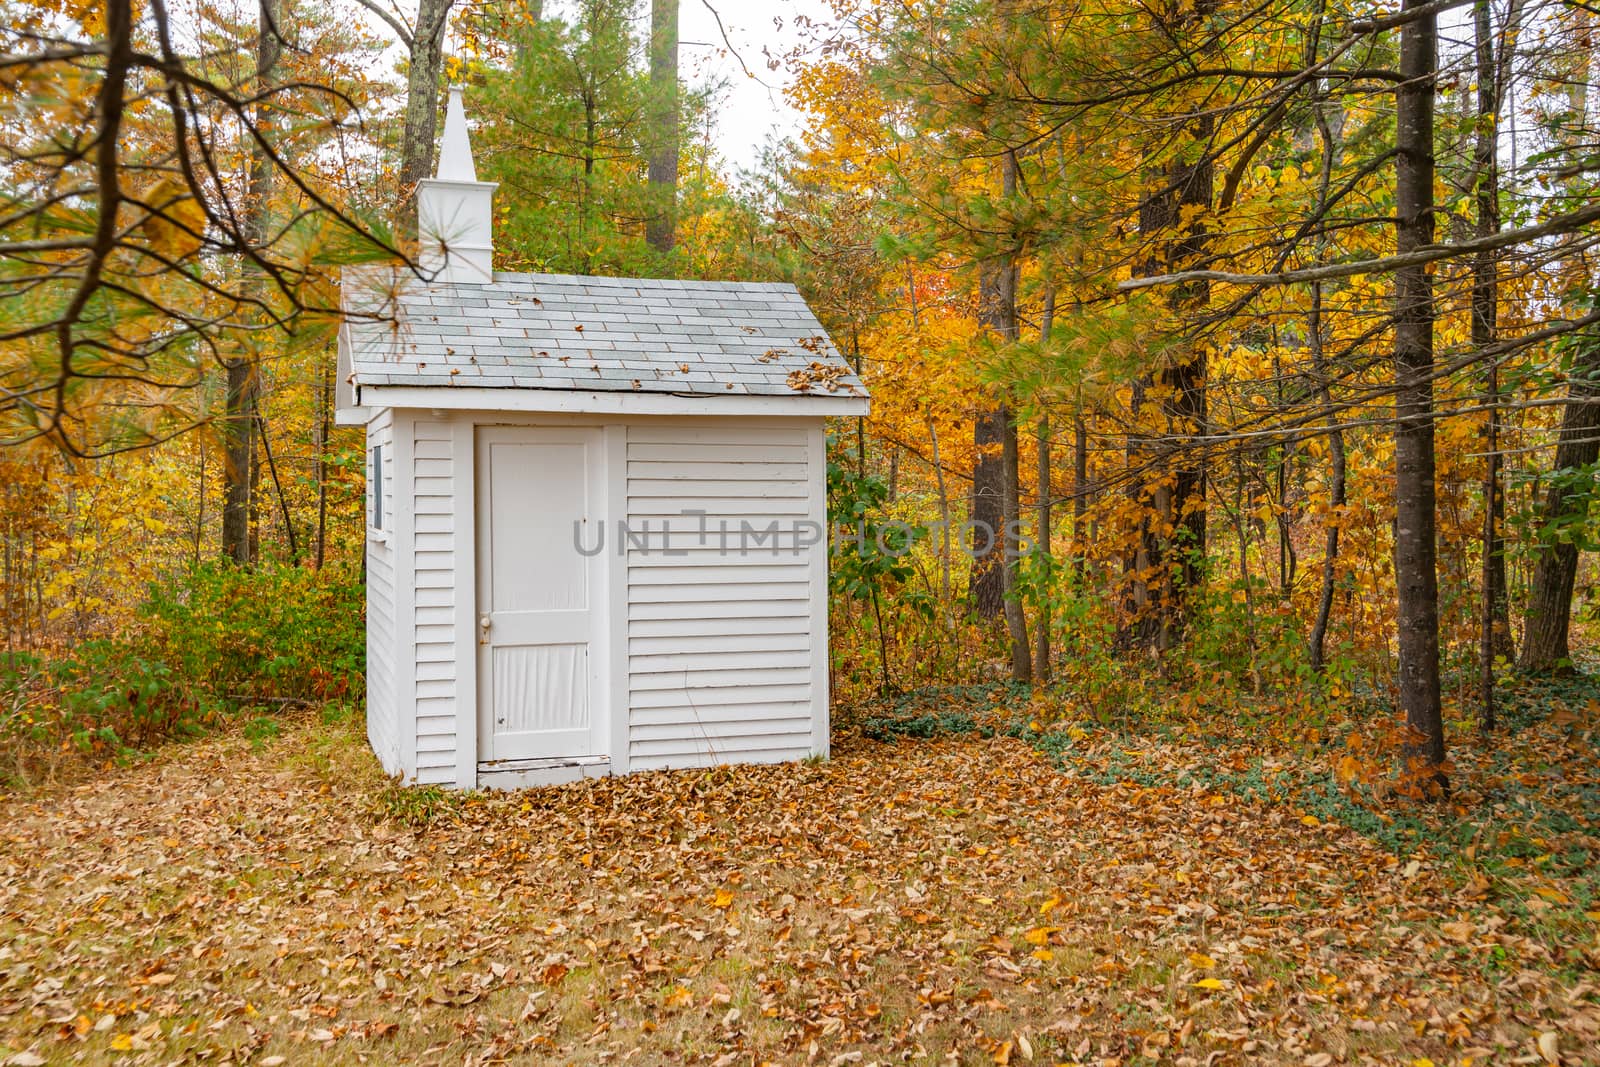 Small white wooden building standing among trees in autumn colors and surrounded by leaf drop in golden hues.